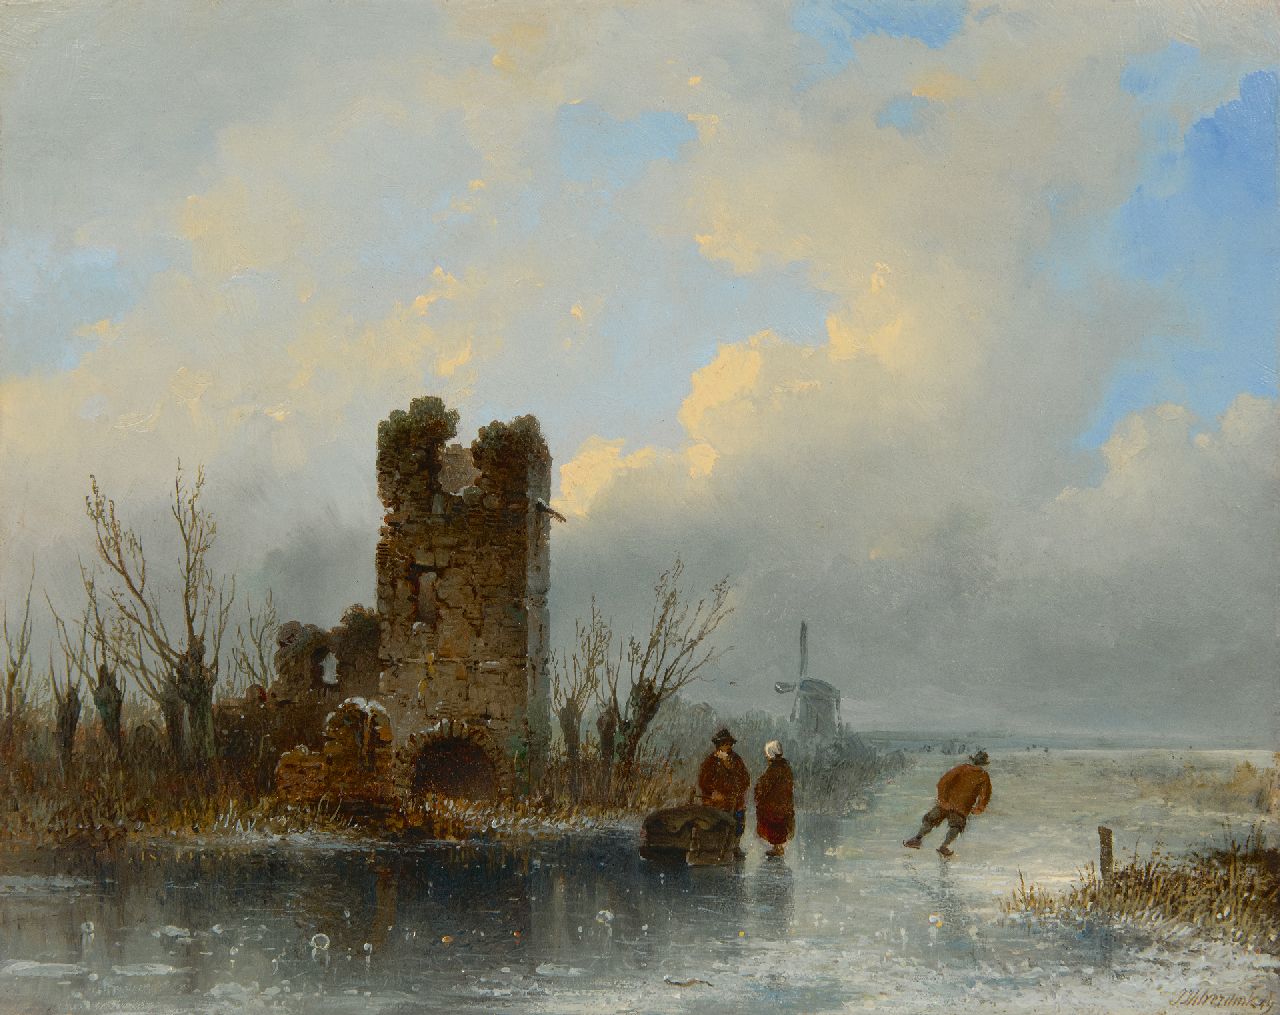 Hilverdink J.  | Johannes Hilverdink | Paintings offered for sale | A winter day on the ice, oil on panel 24.7 x 31.3 cm, signed l.r. and dated '49